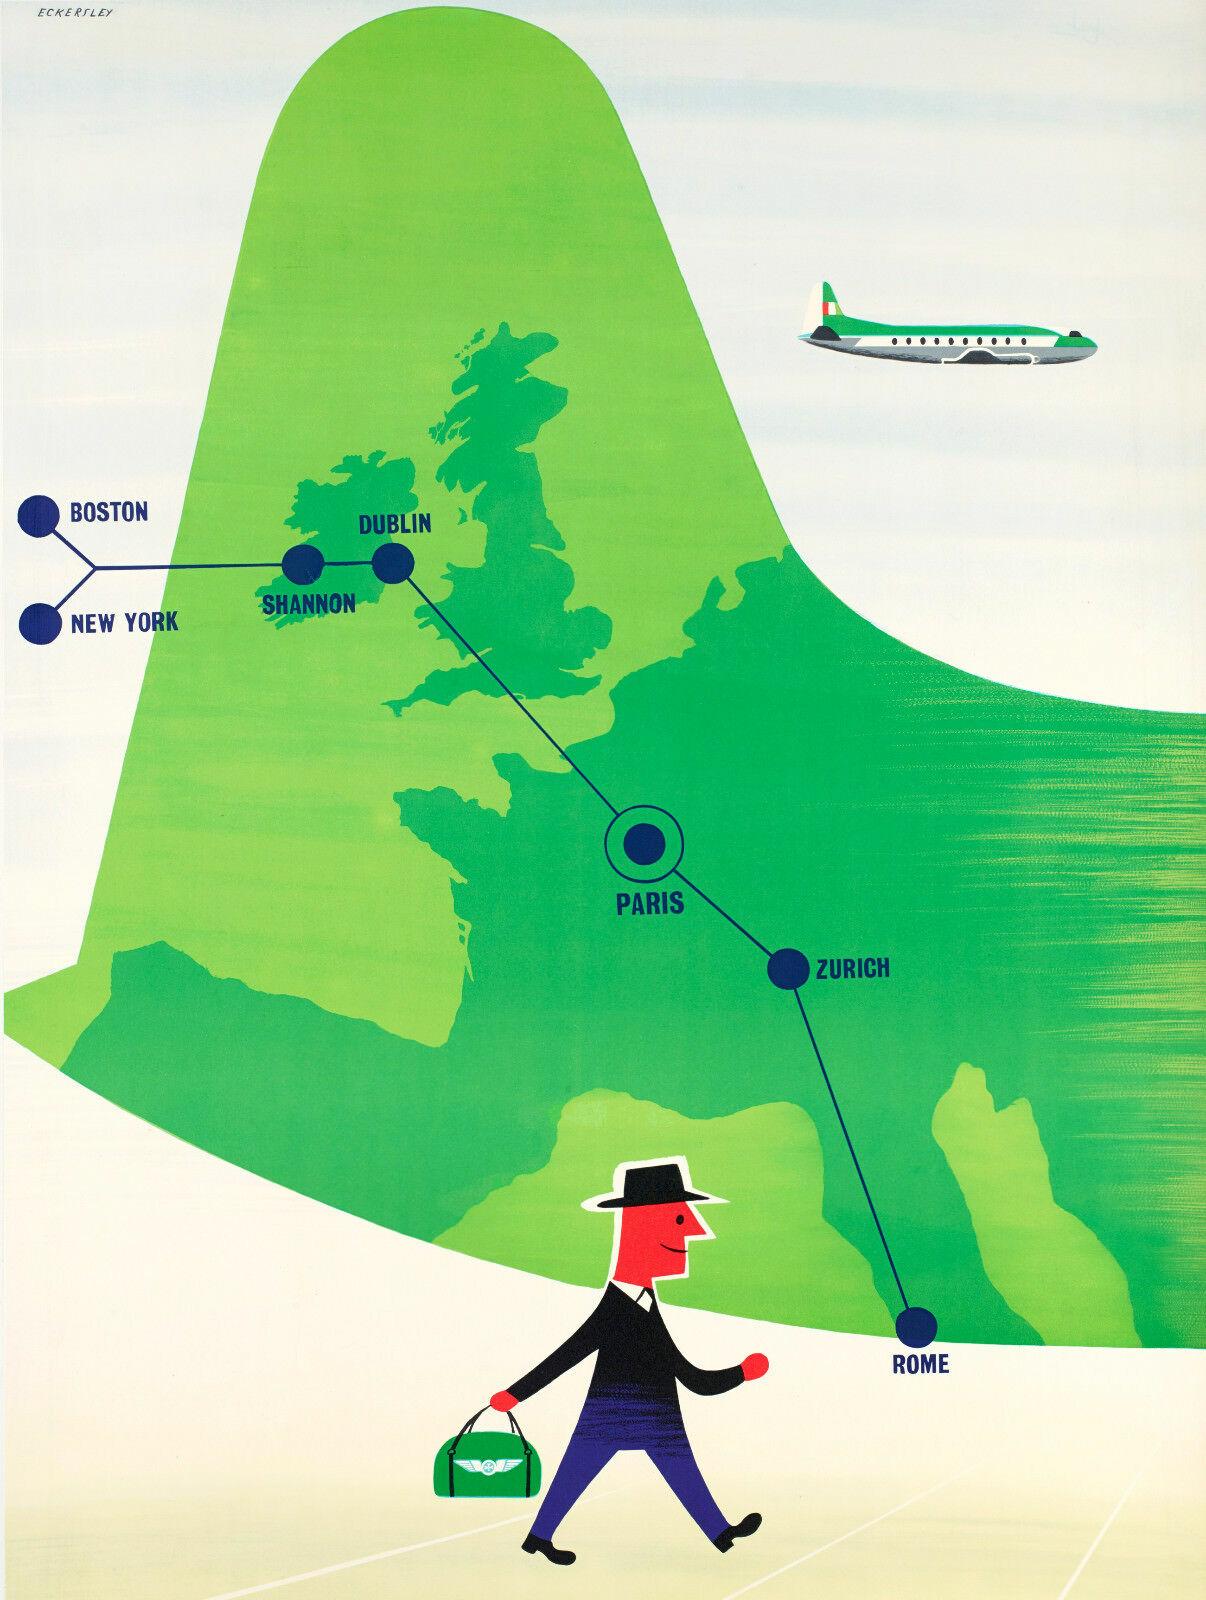 Original Vintage Poster-T. Eckersley-Aer Lingus-Avion-Irlande, c.1960

In 1958, Aerlínte Éireann operated the first transatlantic flight from Shannon to New York. On January 1, 1960, the company, renamed Aer Lingus, opened a new route to Boston.